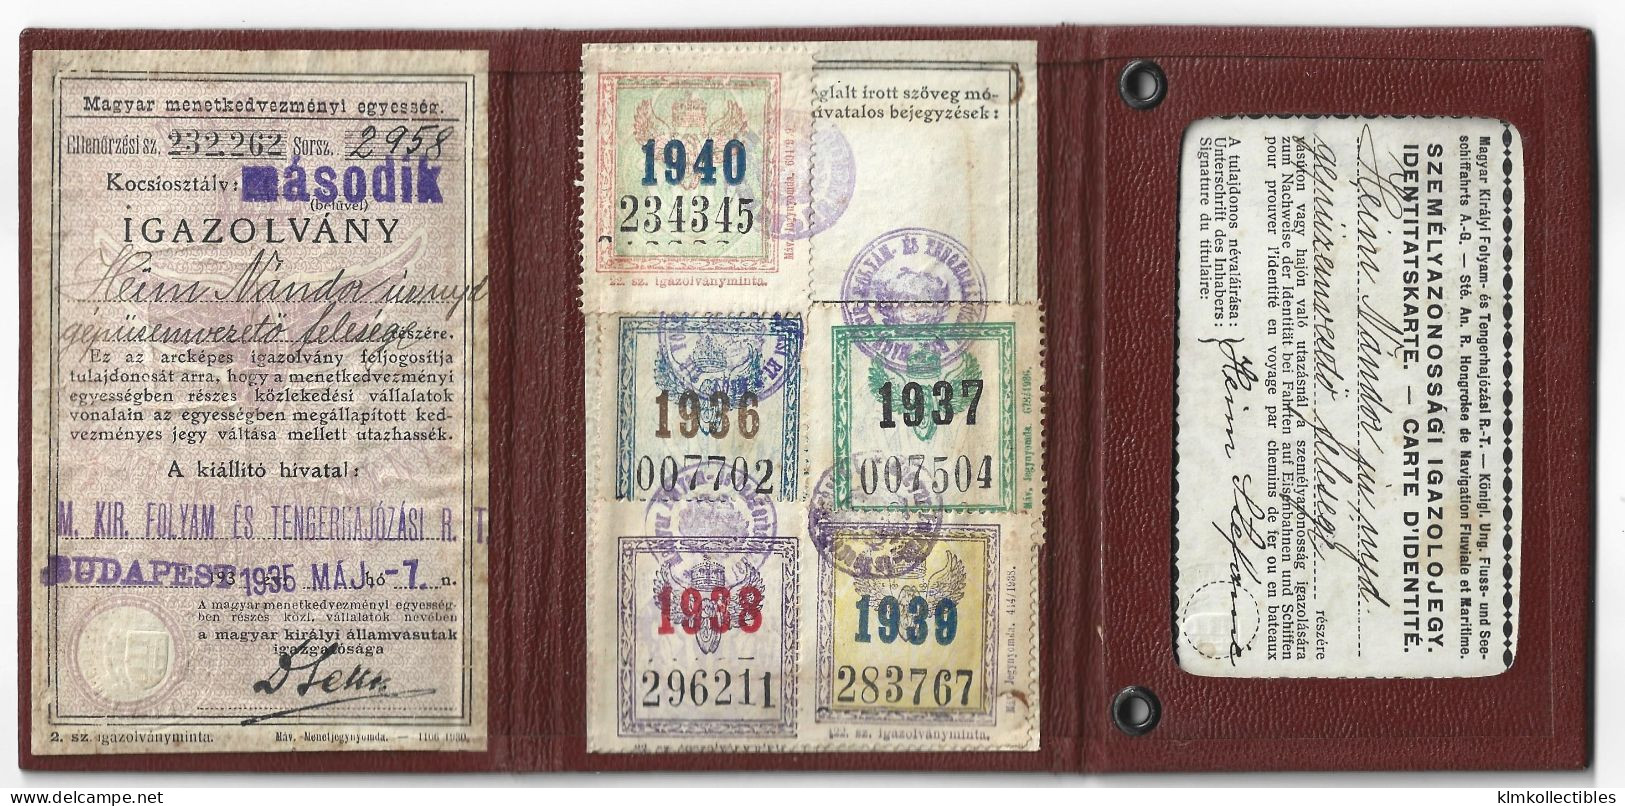 HUNGARY MAGYARRORSZAG - 1936-1940 MFTR IDENTITY CARD - REVENUE STAMPS TIMBRE FISCAL STEUERMARKE - Fiscaux